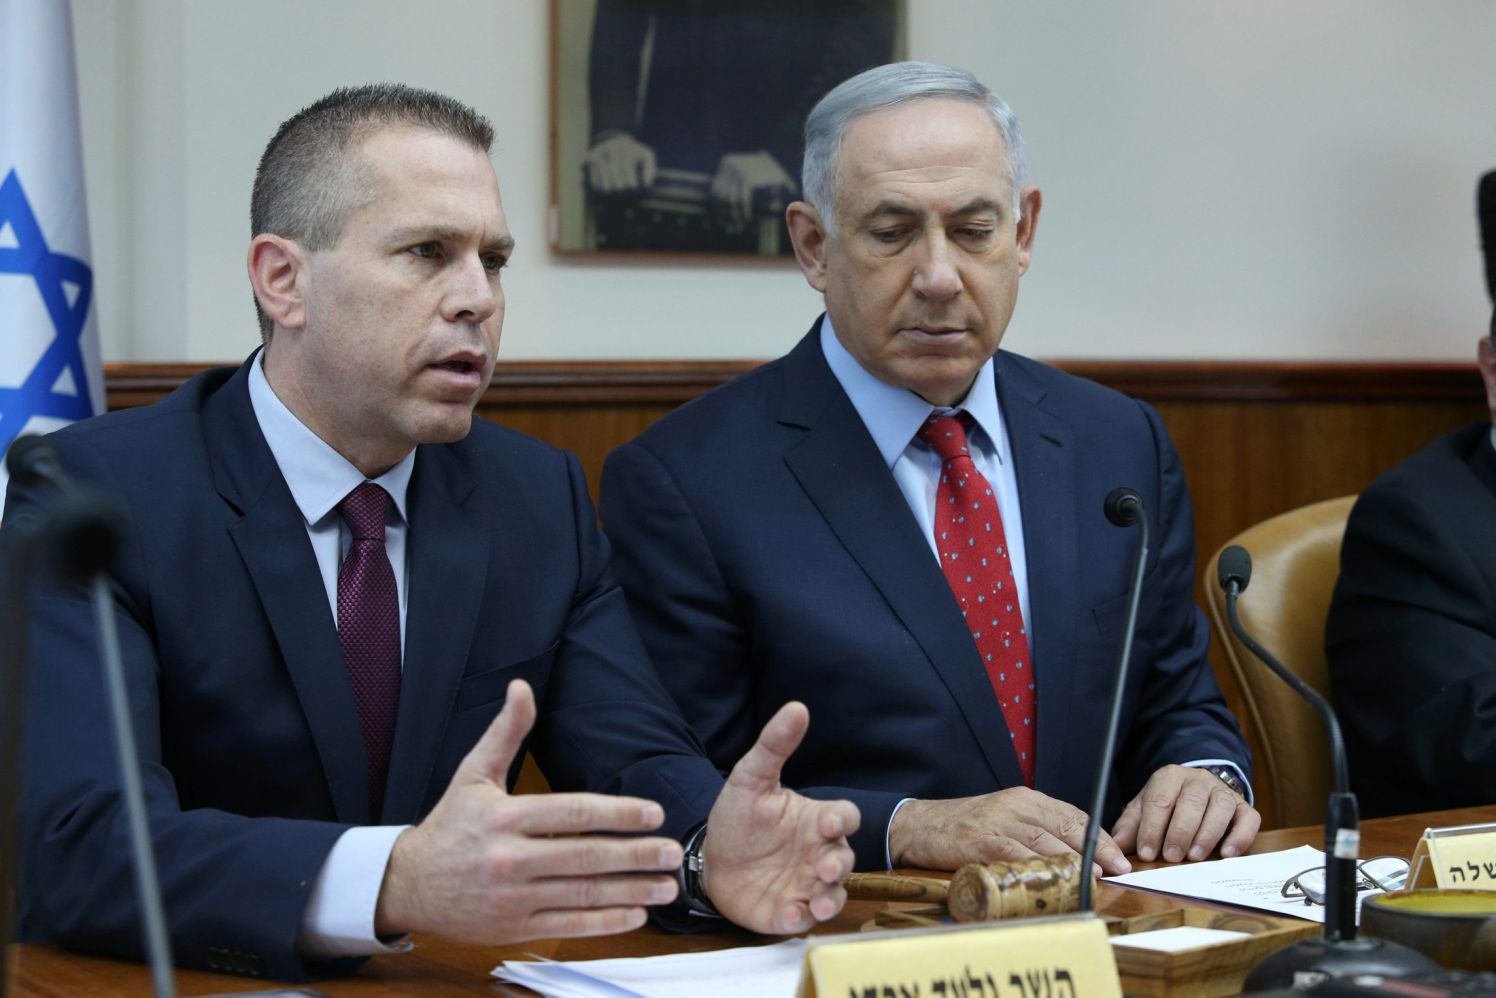 Public Security Minister Gilad Erdan (L) with Prime Minister Benjamin Netanyahu at a weekly cabinet meeting on February 13, 2017. Credit: Amit Sha'abi